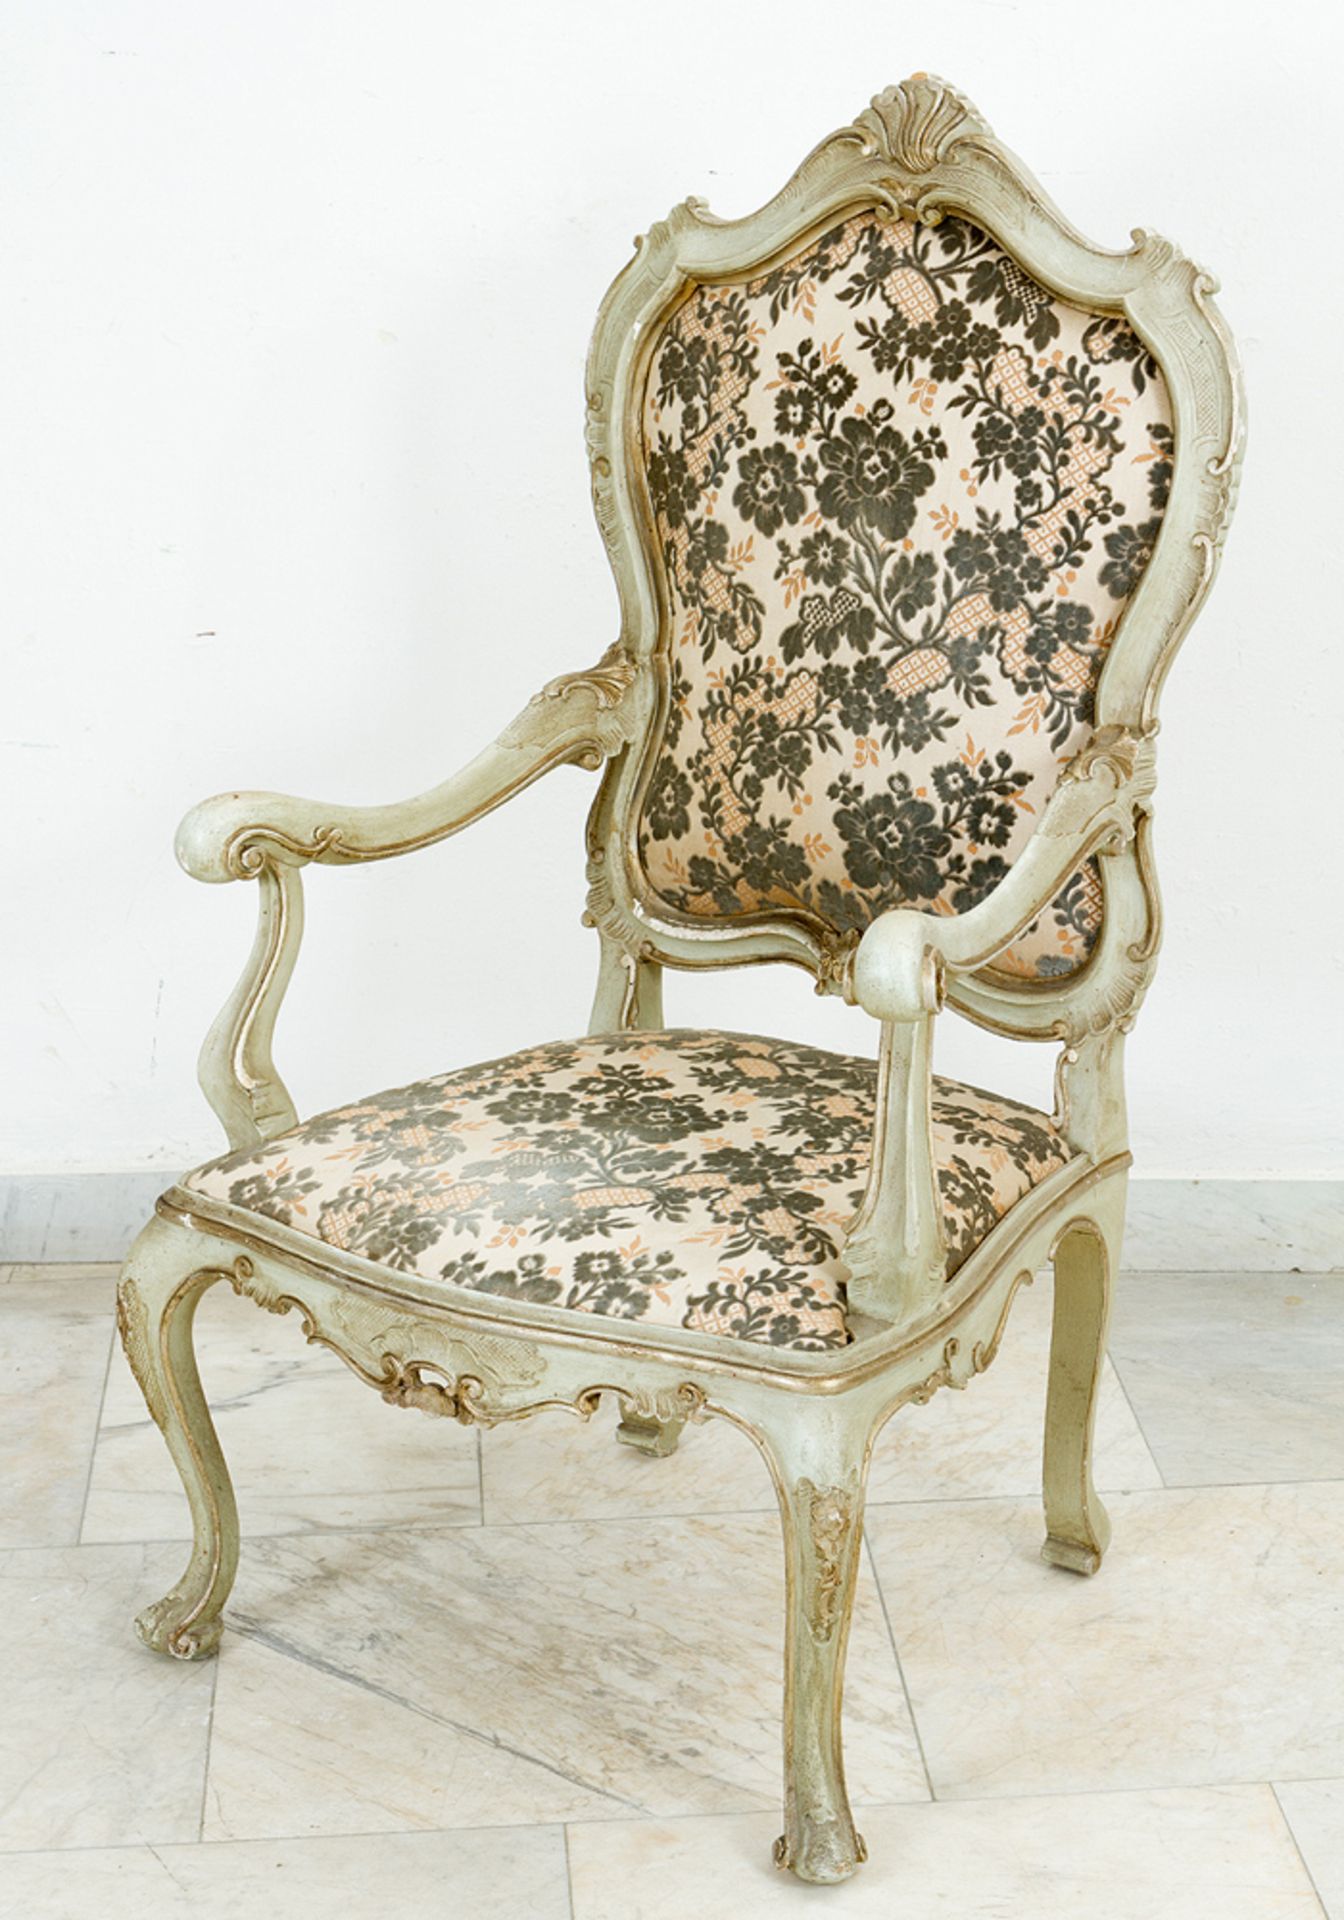 Pair of Venetian arm chairs - Image 3 of 3